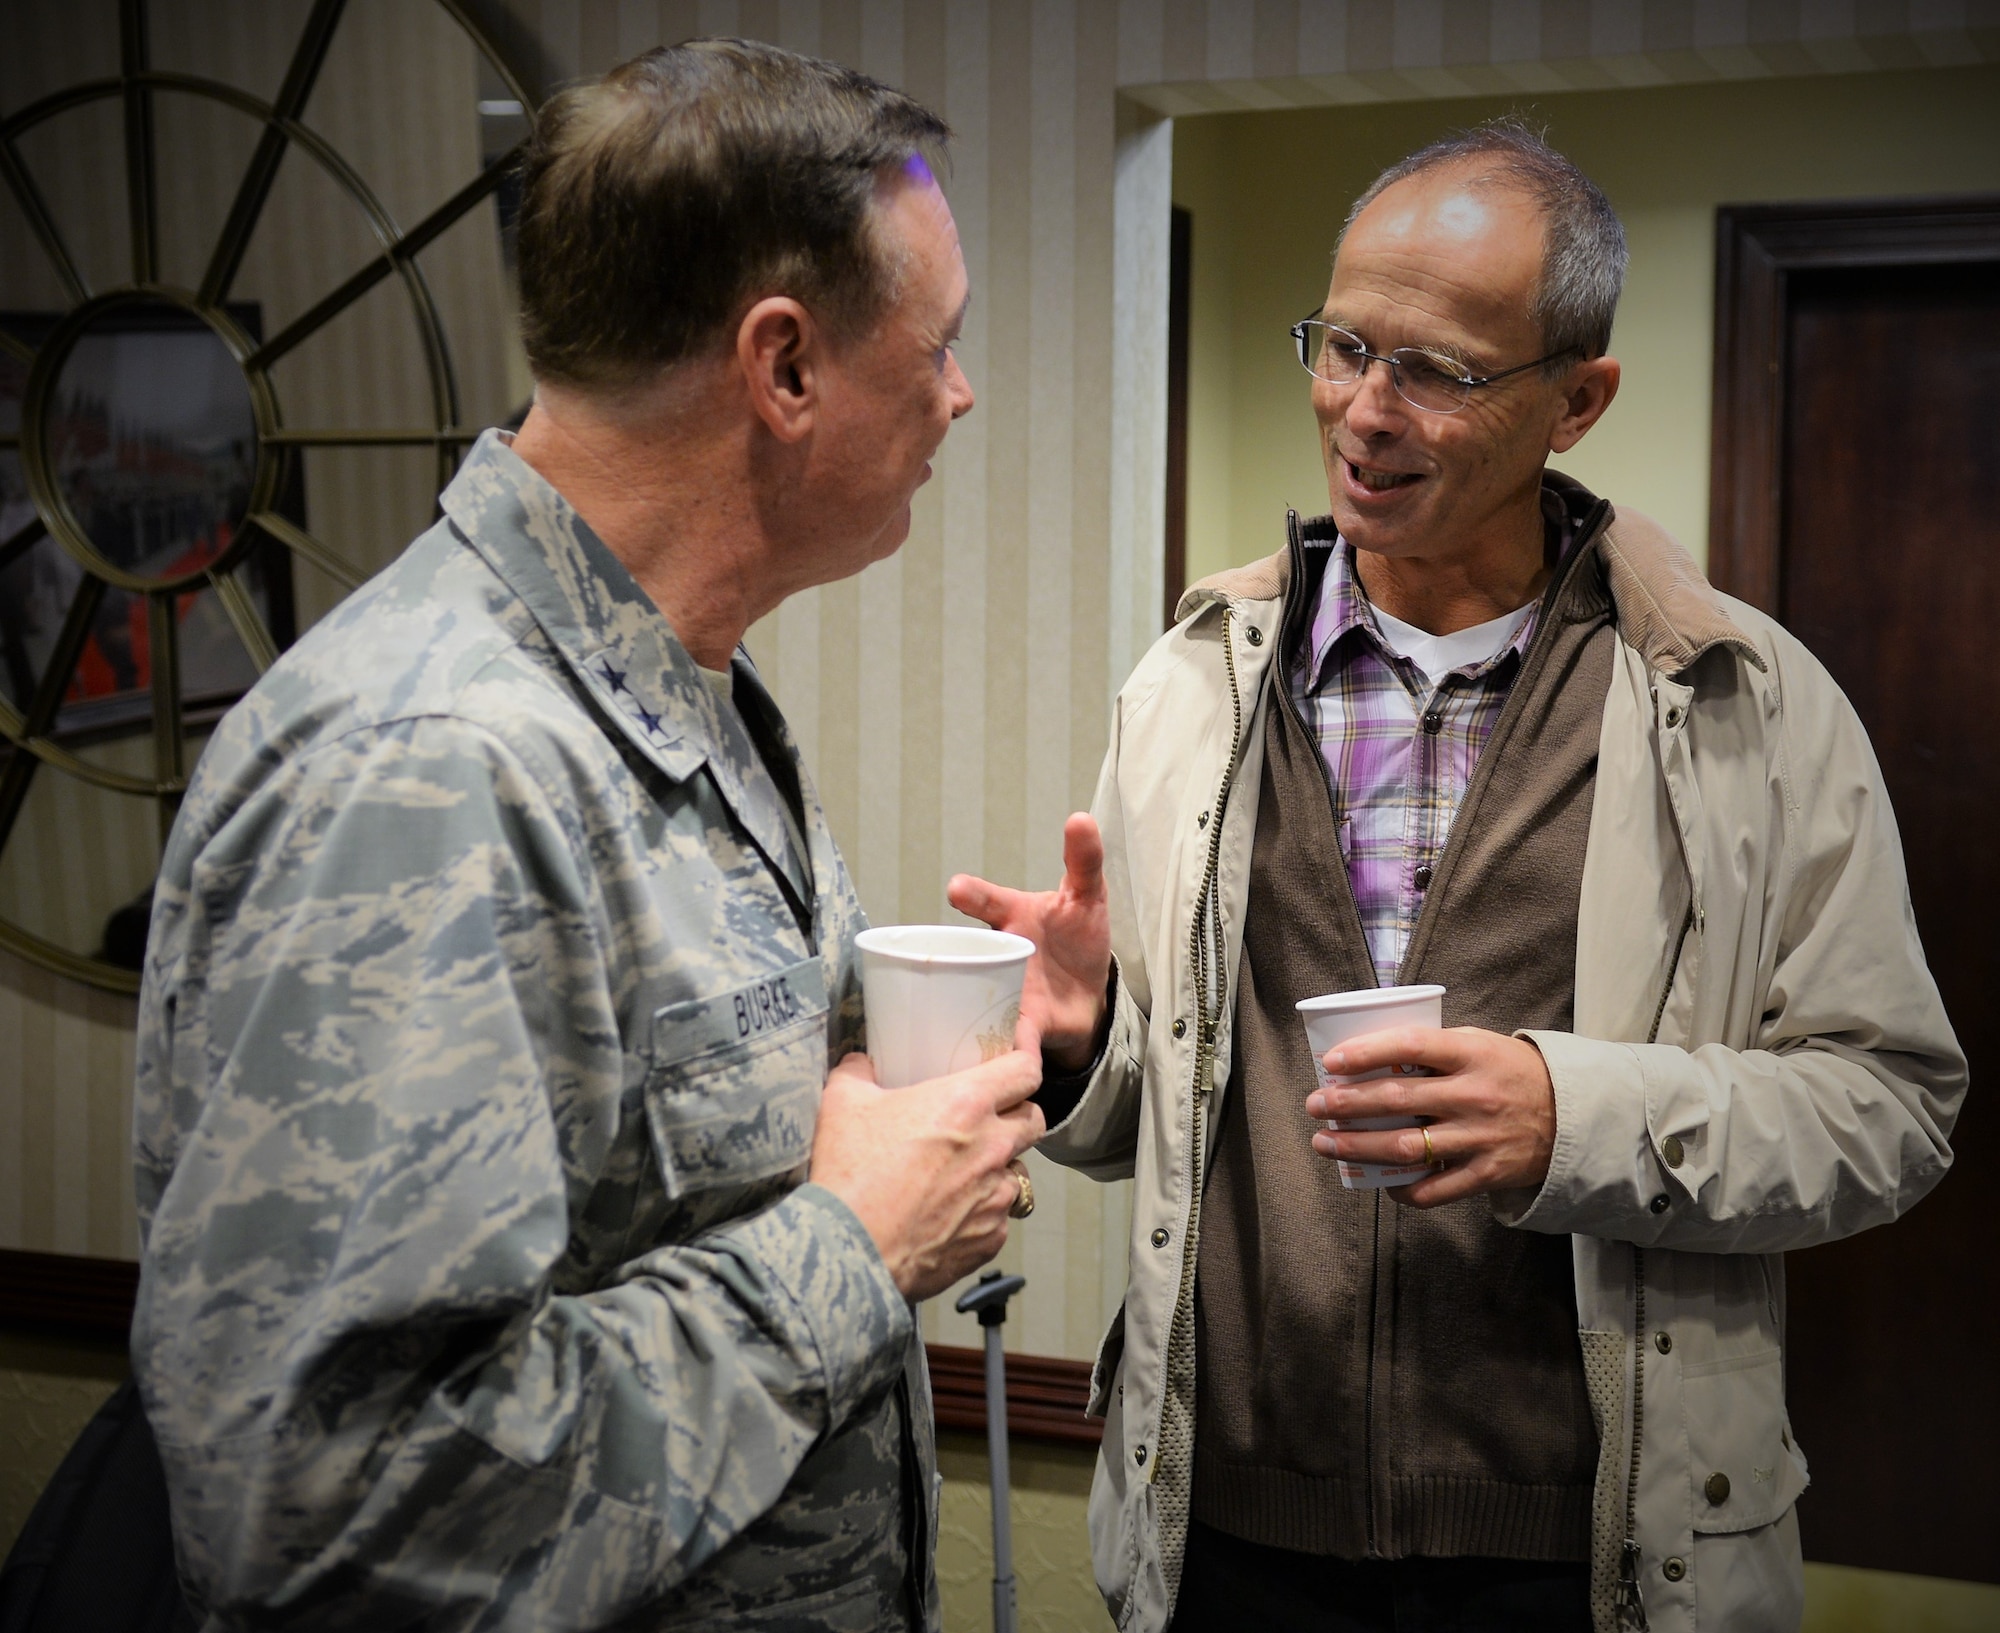 Air Force District of Washington Commander Maj. Gen. Darryl Burke meets with Colonel Bernhard Altersberger, German Air Attaché, before he departs Joint Base Andrews Oct. 25, 2015. Air Attachés from several countries are currently touring Air Force installations across the United States to gain familiarity with the Air Force mission and to help build and sustain relationships between the U.S. and their respective countries.